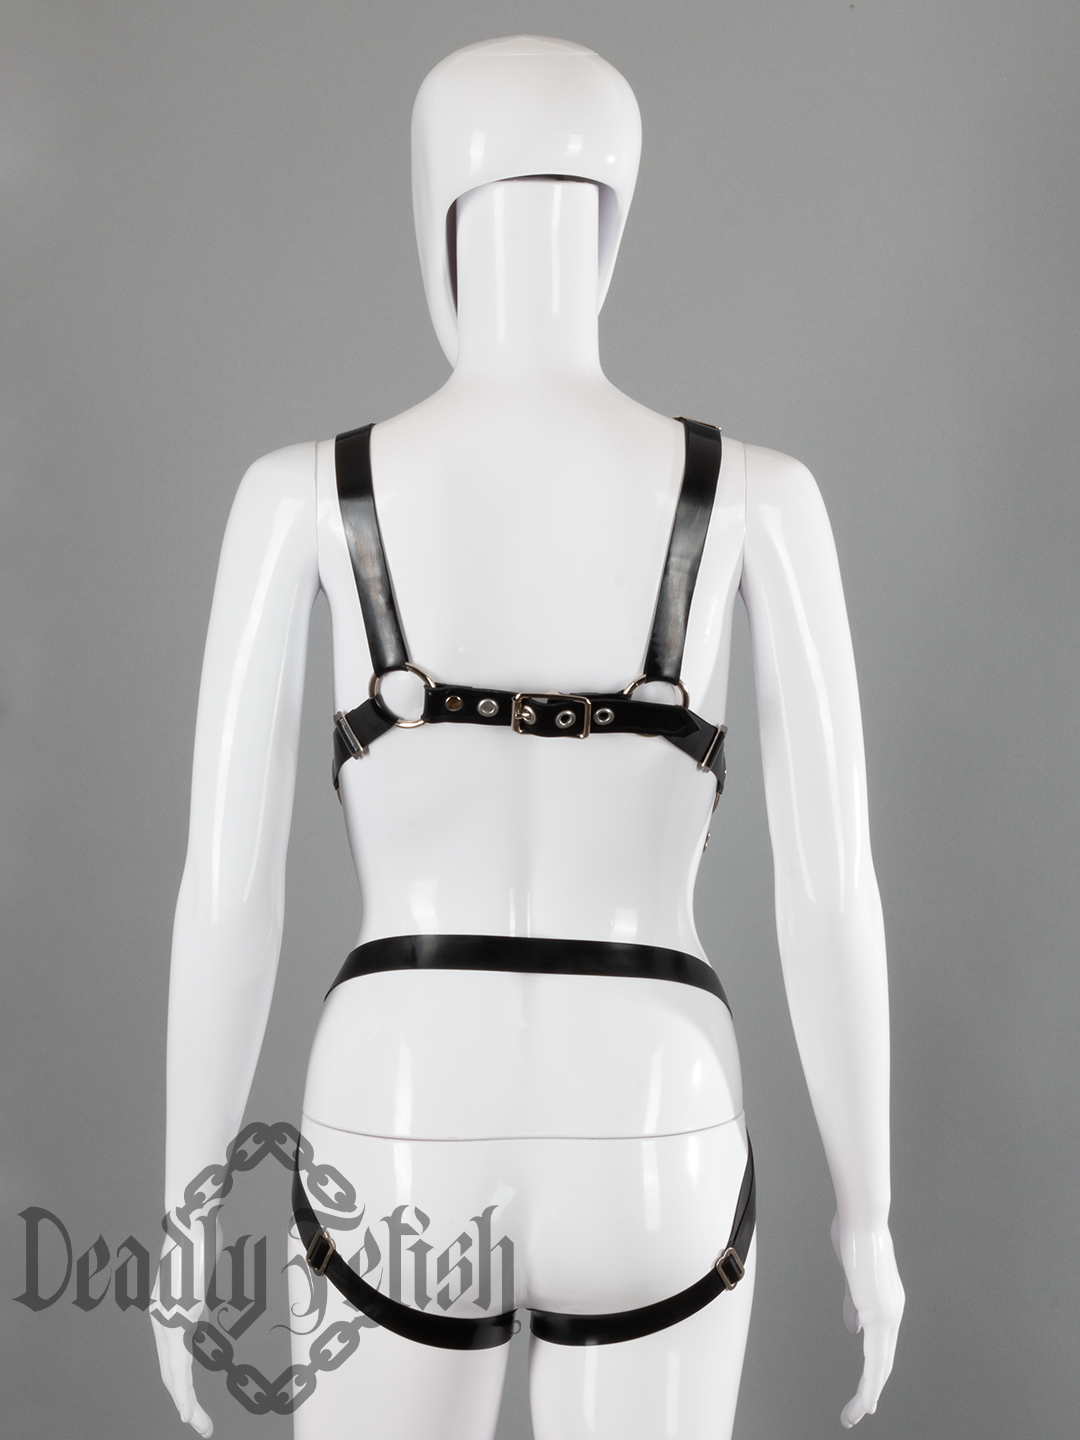 Deadly Fetish Latex: Harness #82